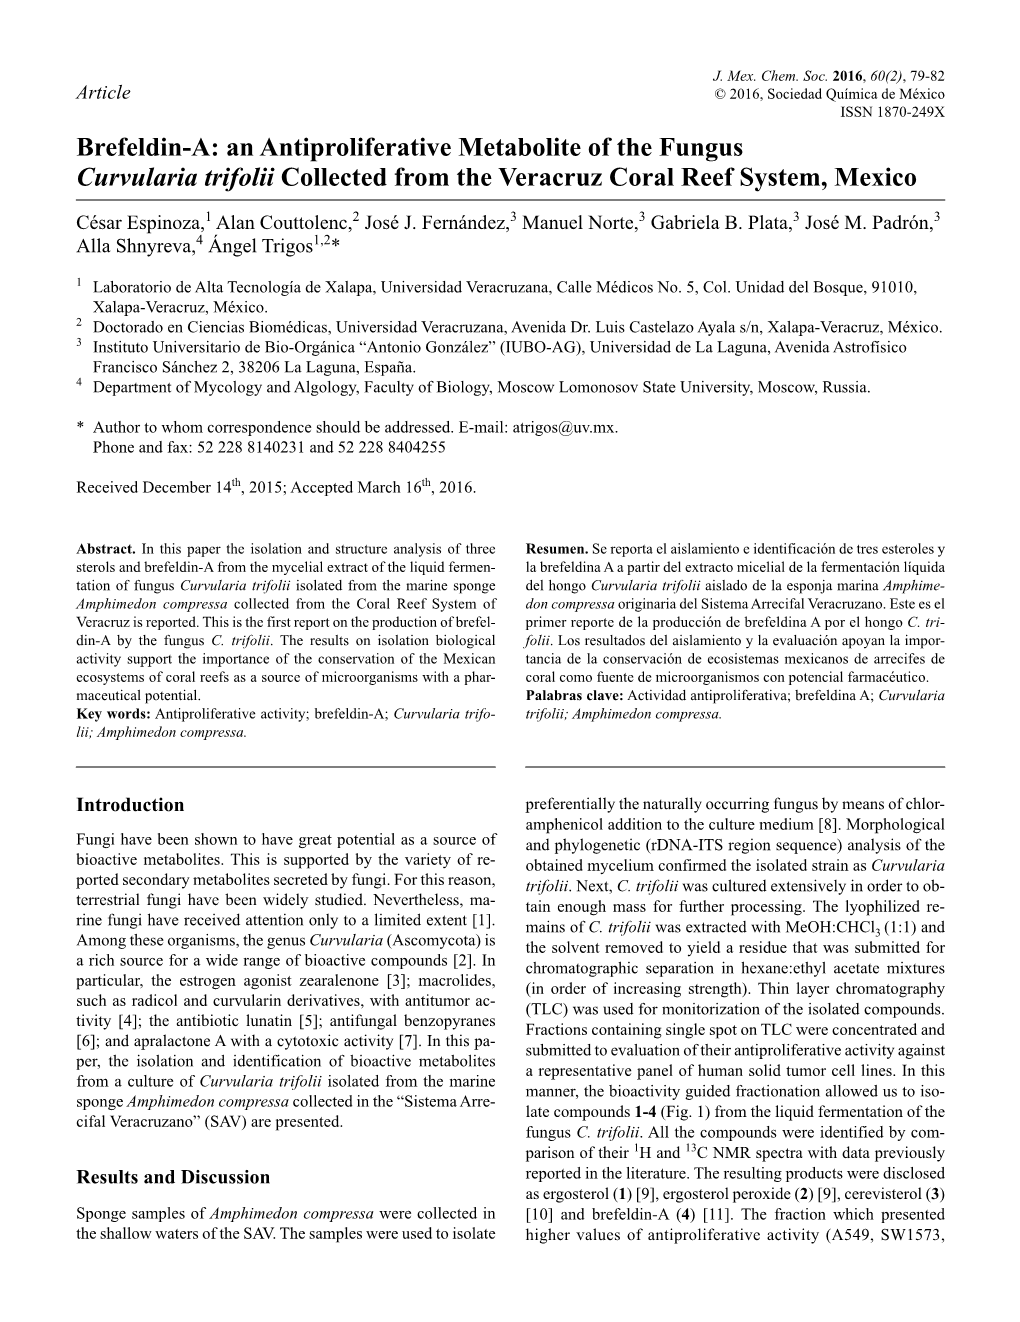 An Antiproliferative Metabolite of the Fungus Curvularia Trifolii Collected from the Veracruz Coral Reef System, Mexico